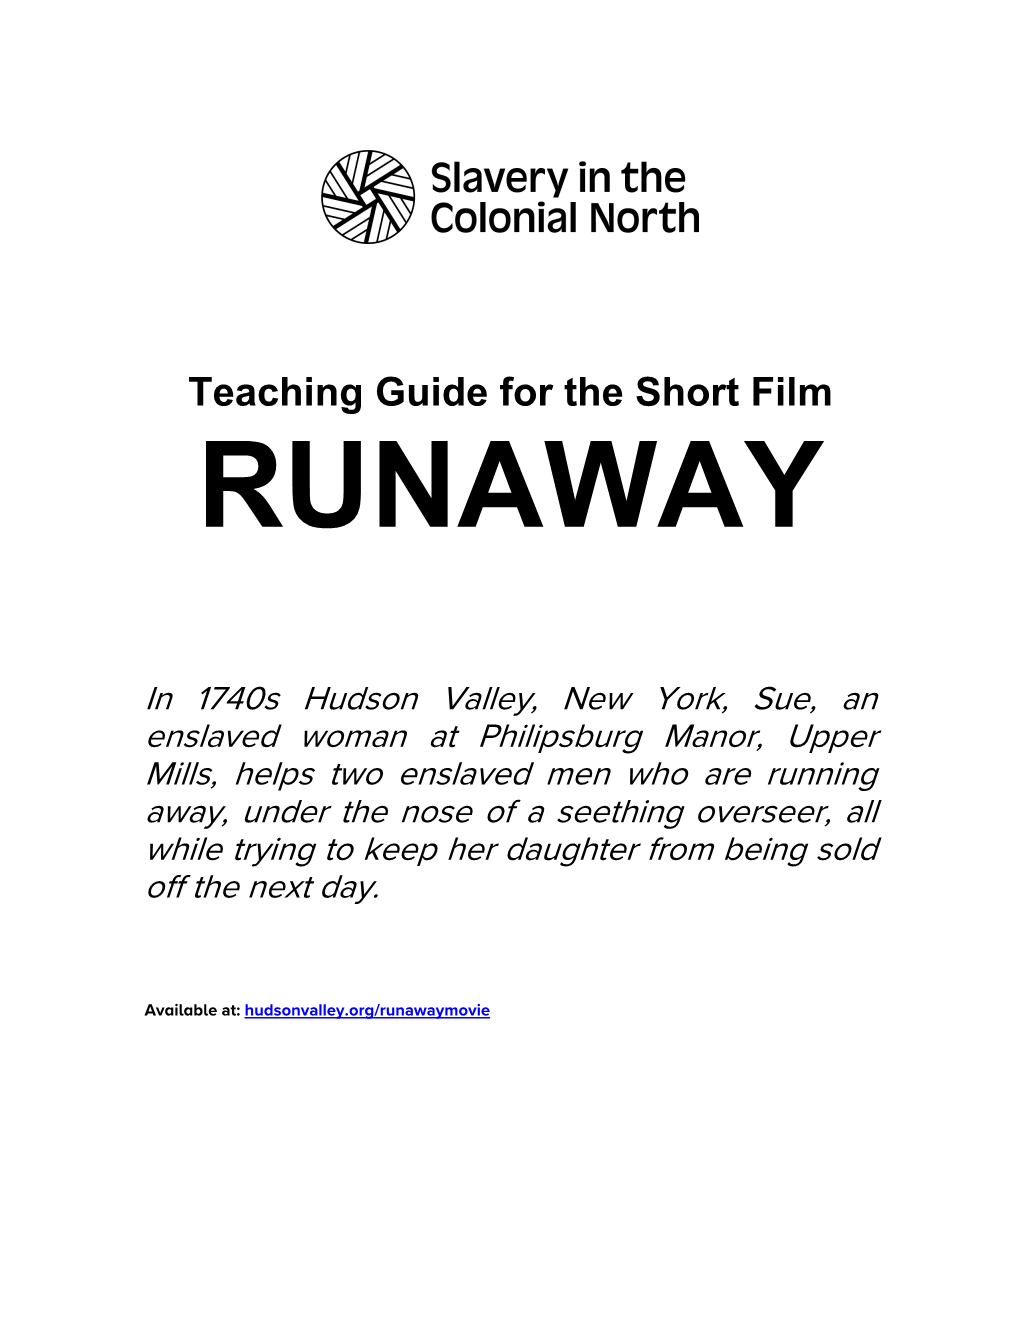 Teaching Guide for the Short Film RUNAWAY